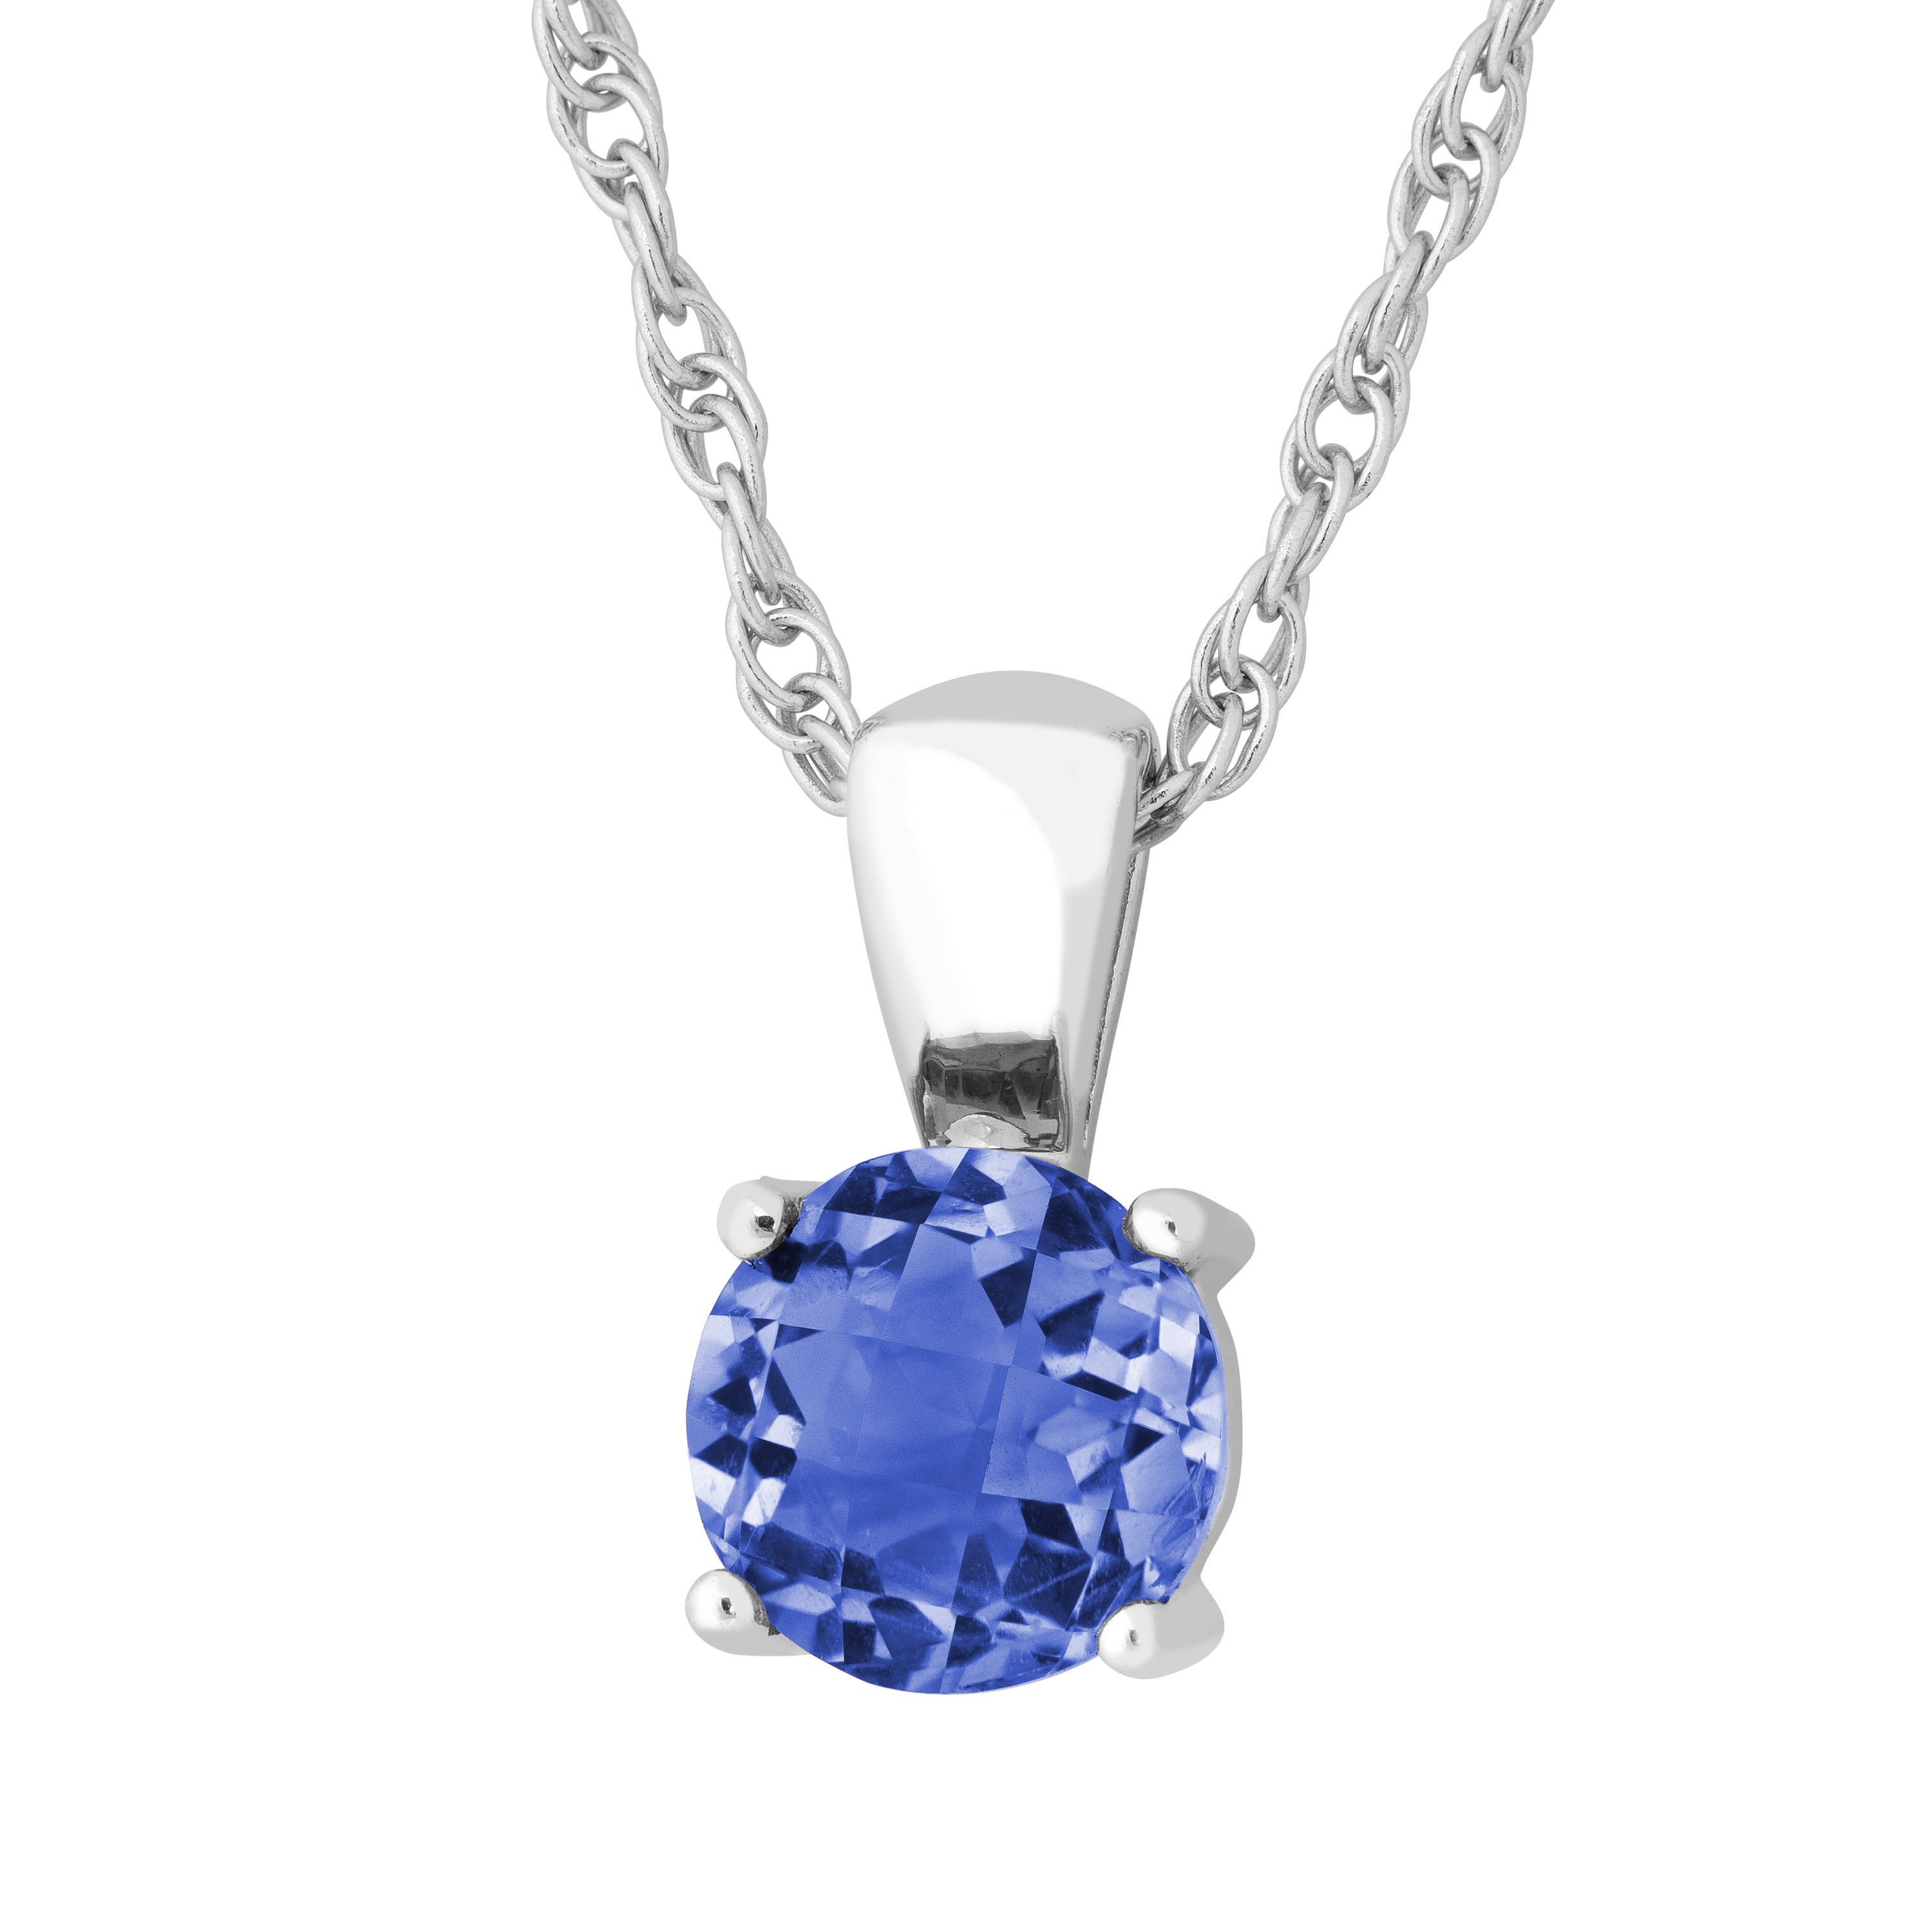 Created Round Blue Sapphire Pendant Necklace, Rhodium Plated Sterling Silver